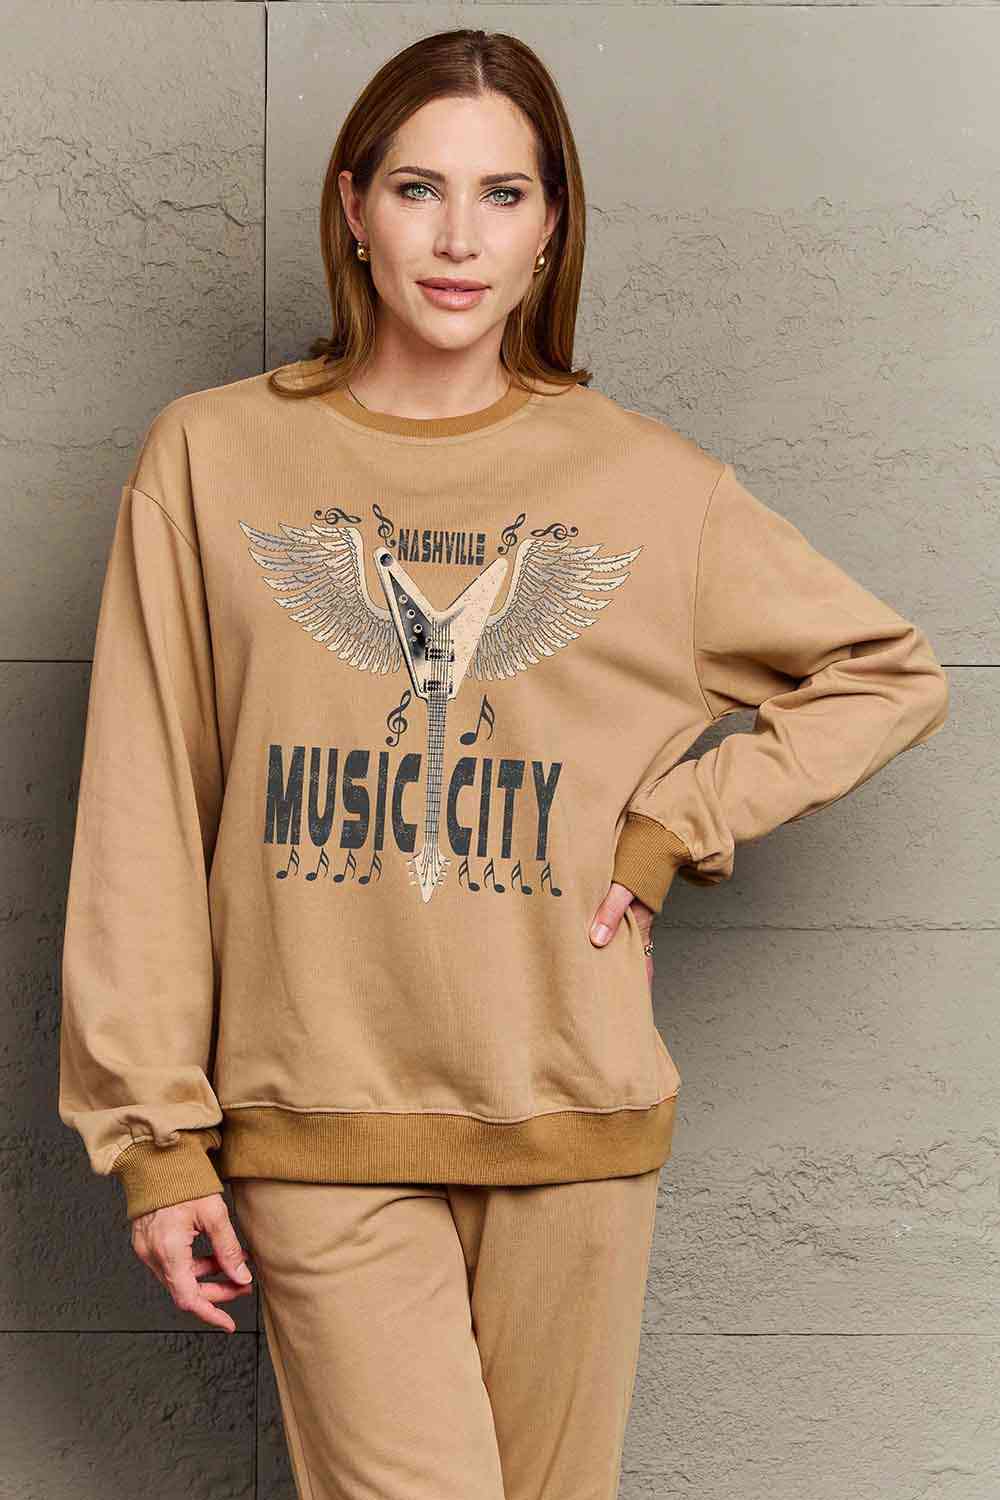 Simply Love Simply Love Full Size Round Neck Dropped Shoulder MUSIC CITY Graphic Sweatshirt